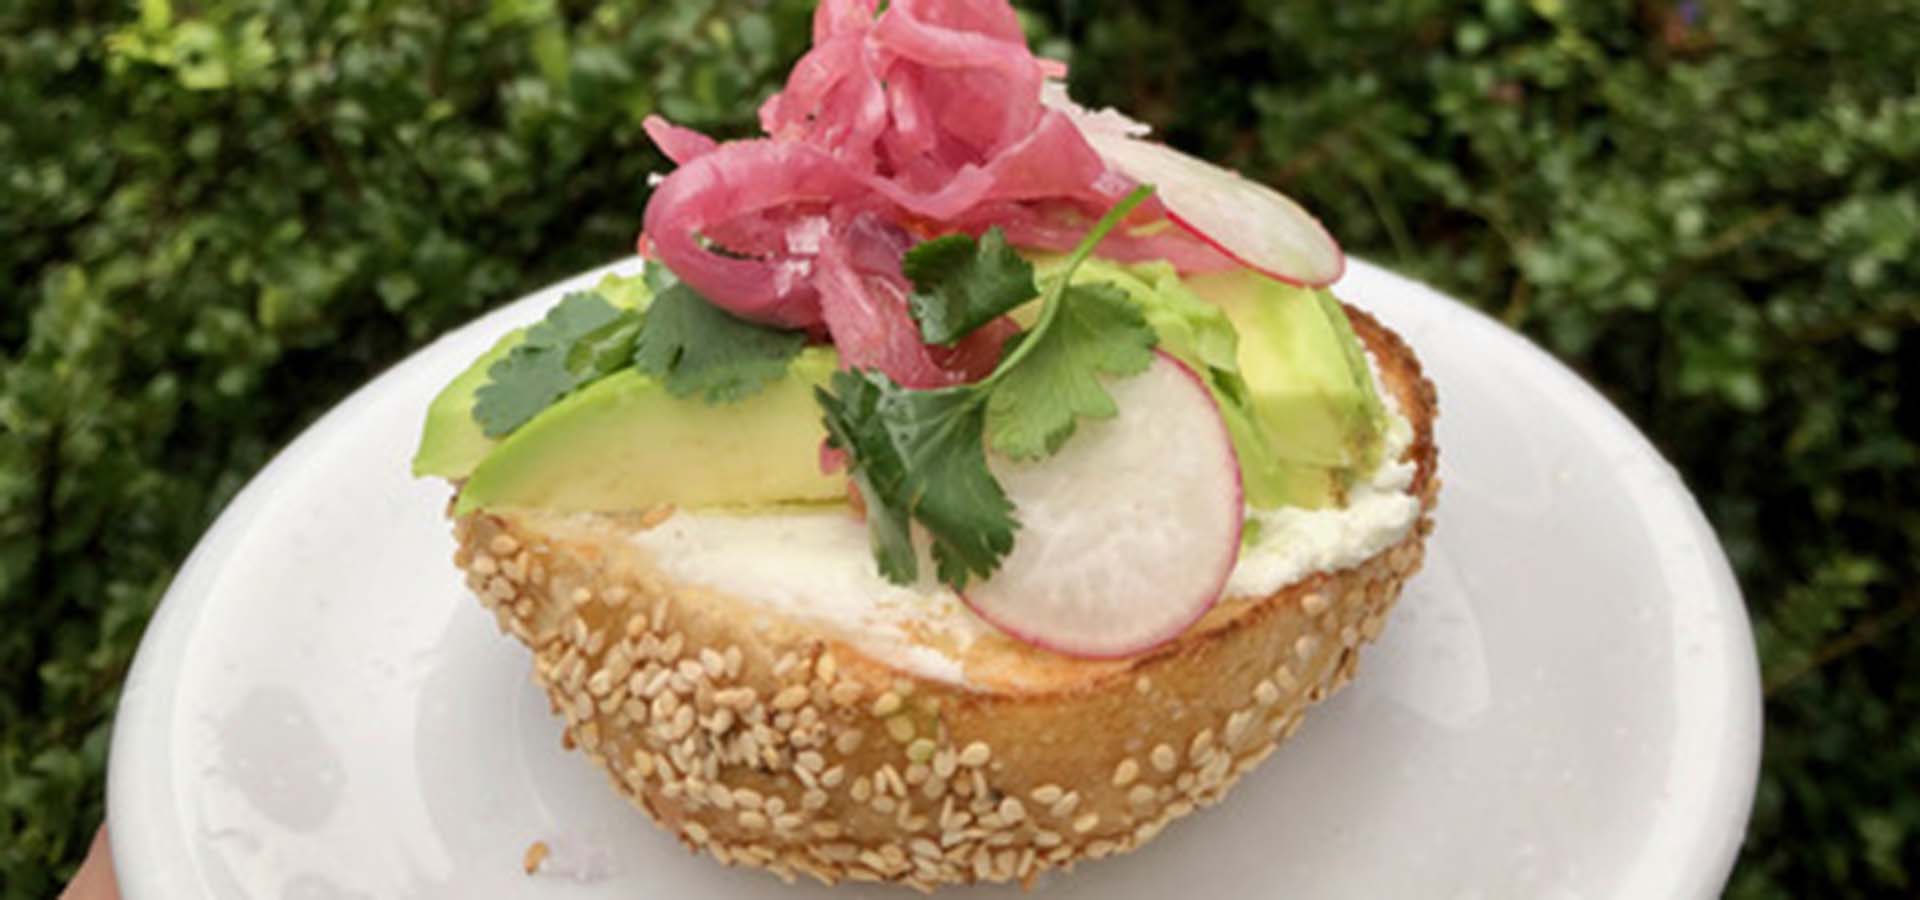 Half a sesame bagel with cream cheese, avocado, radish and pickled onion on a plate.